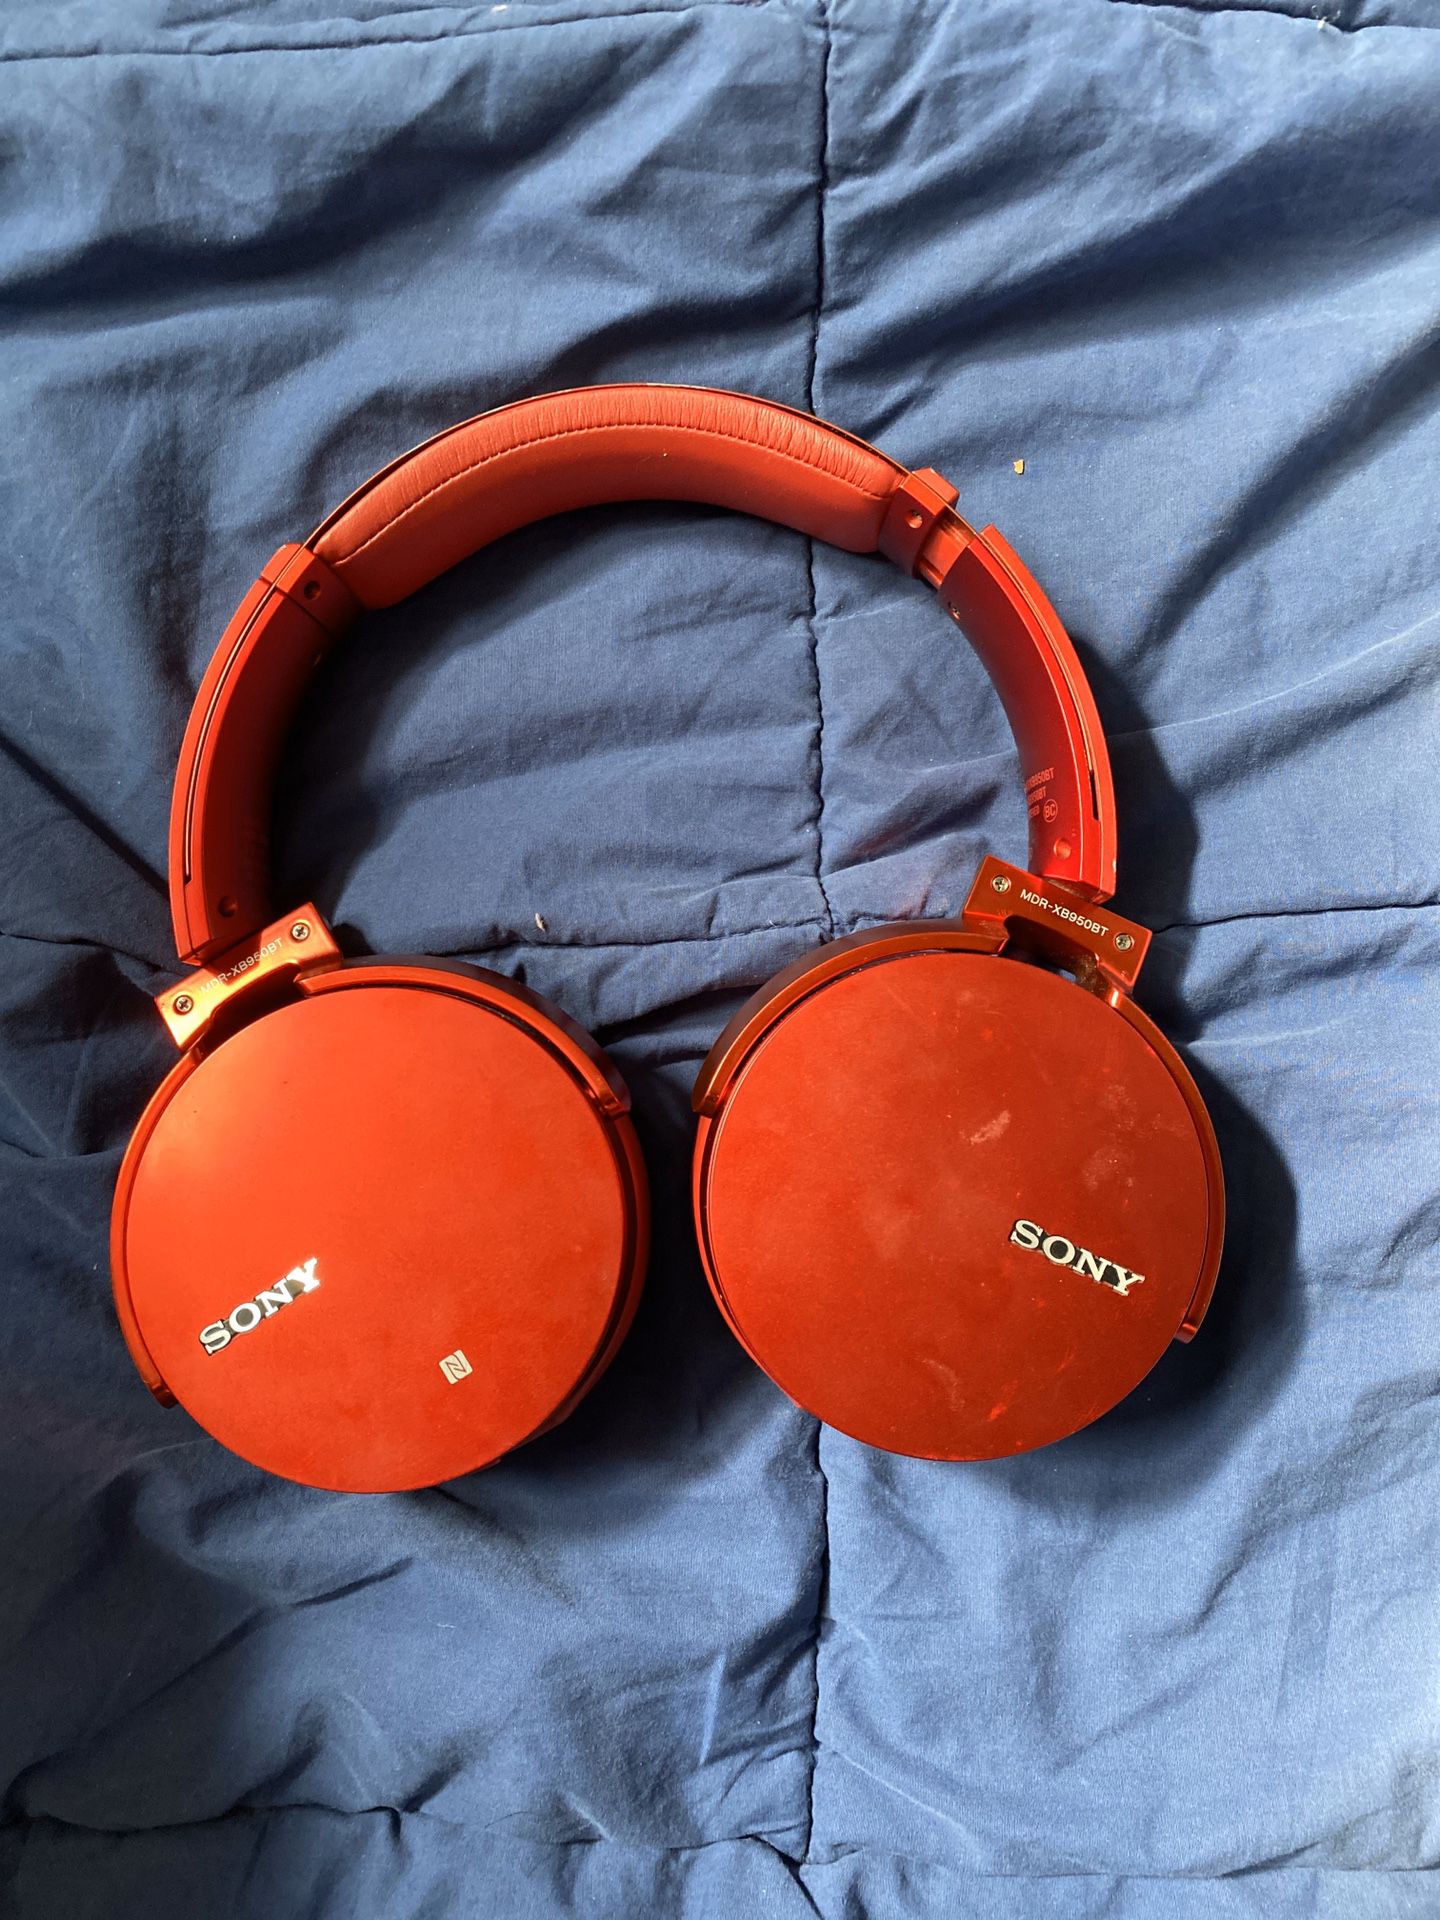 Sony Bass Boosted headphones